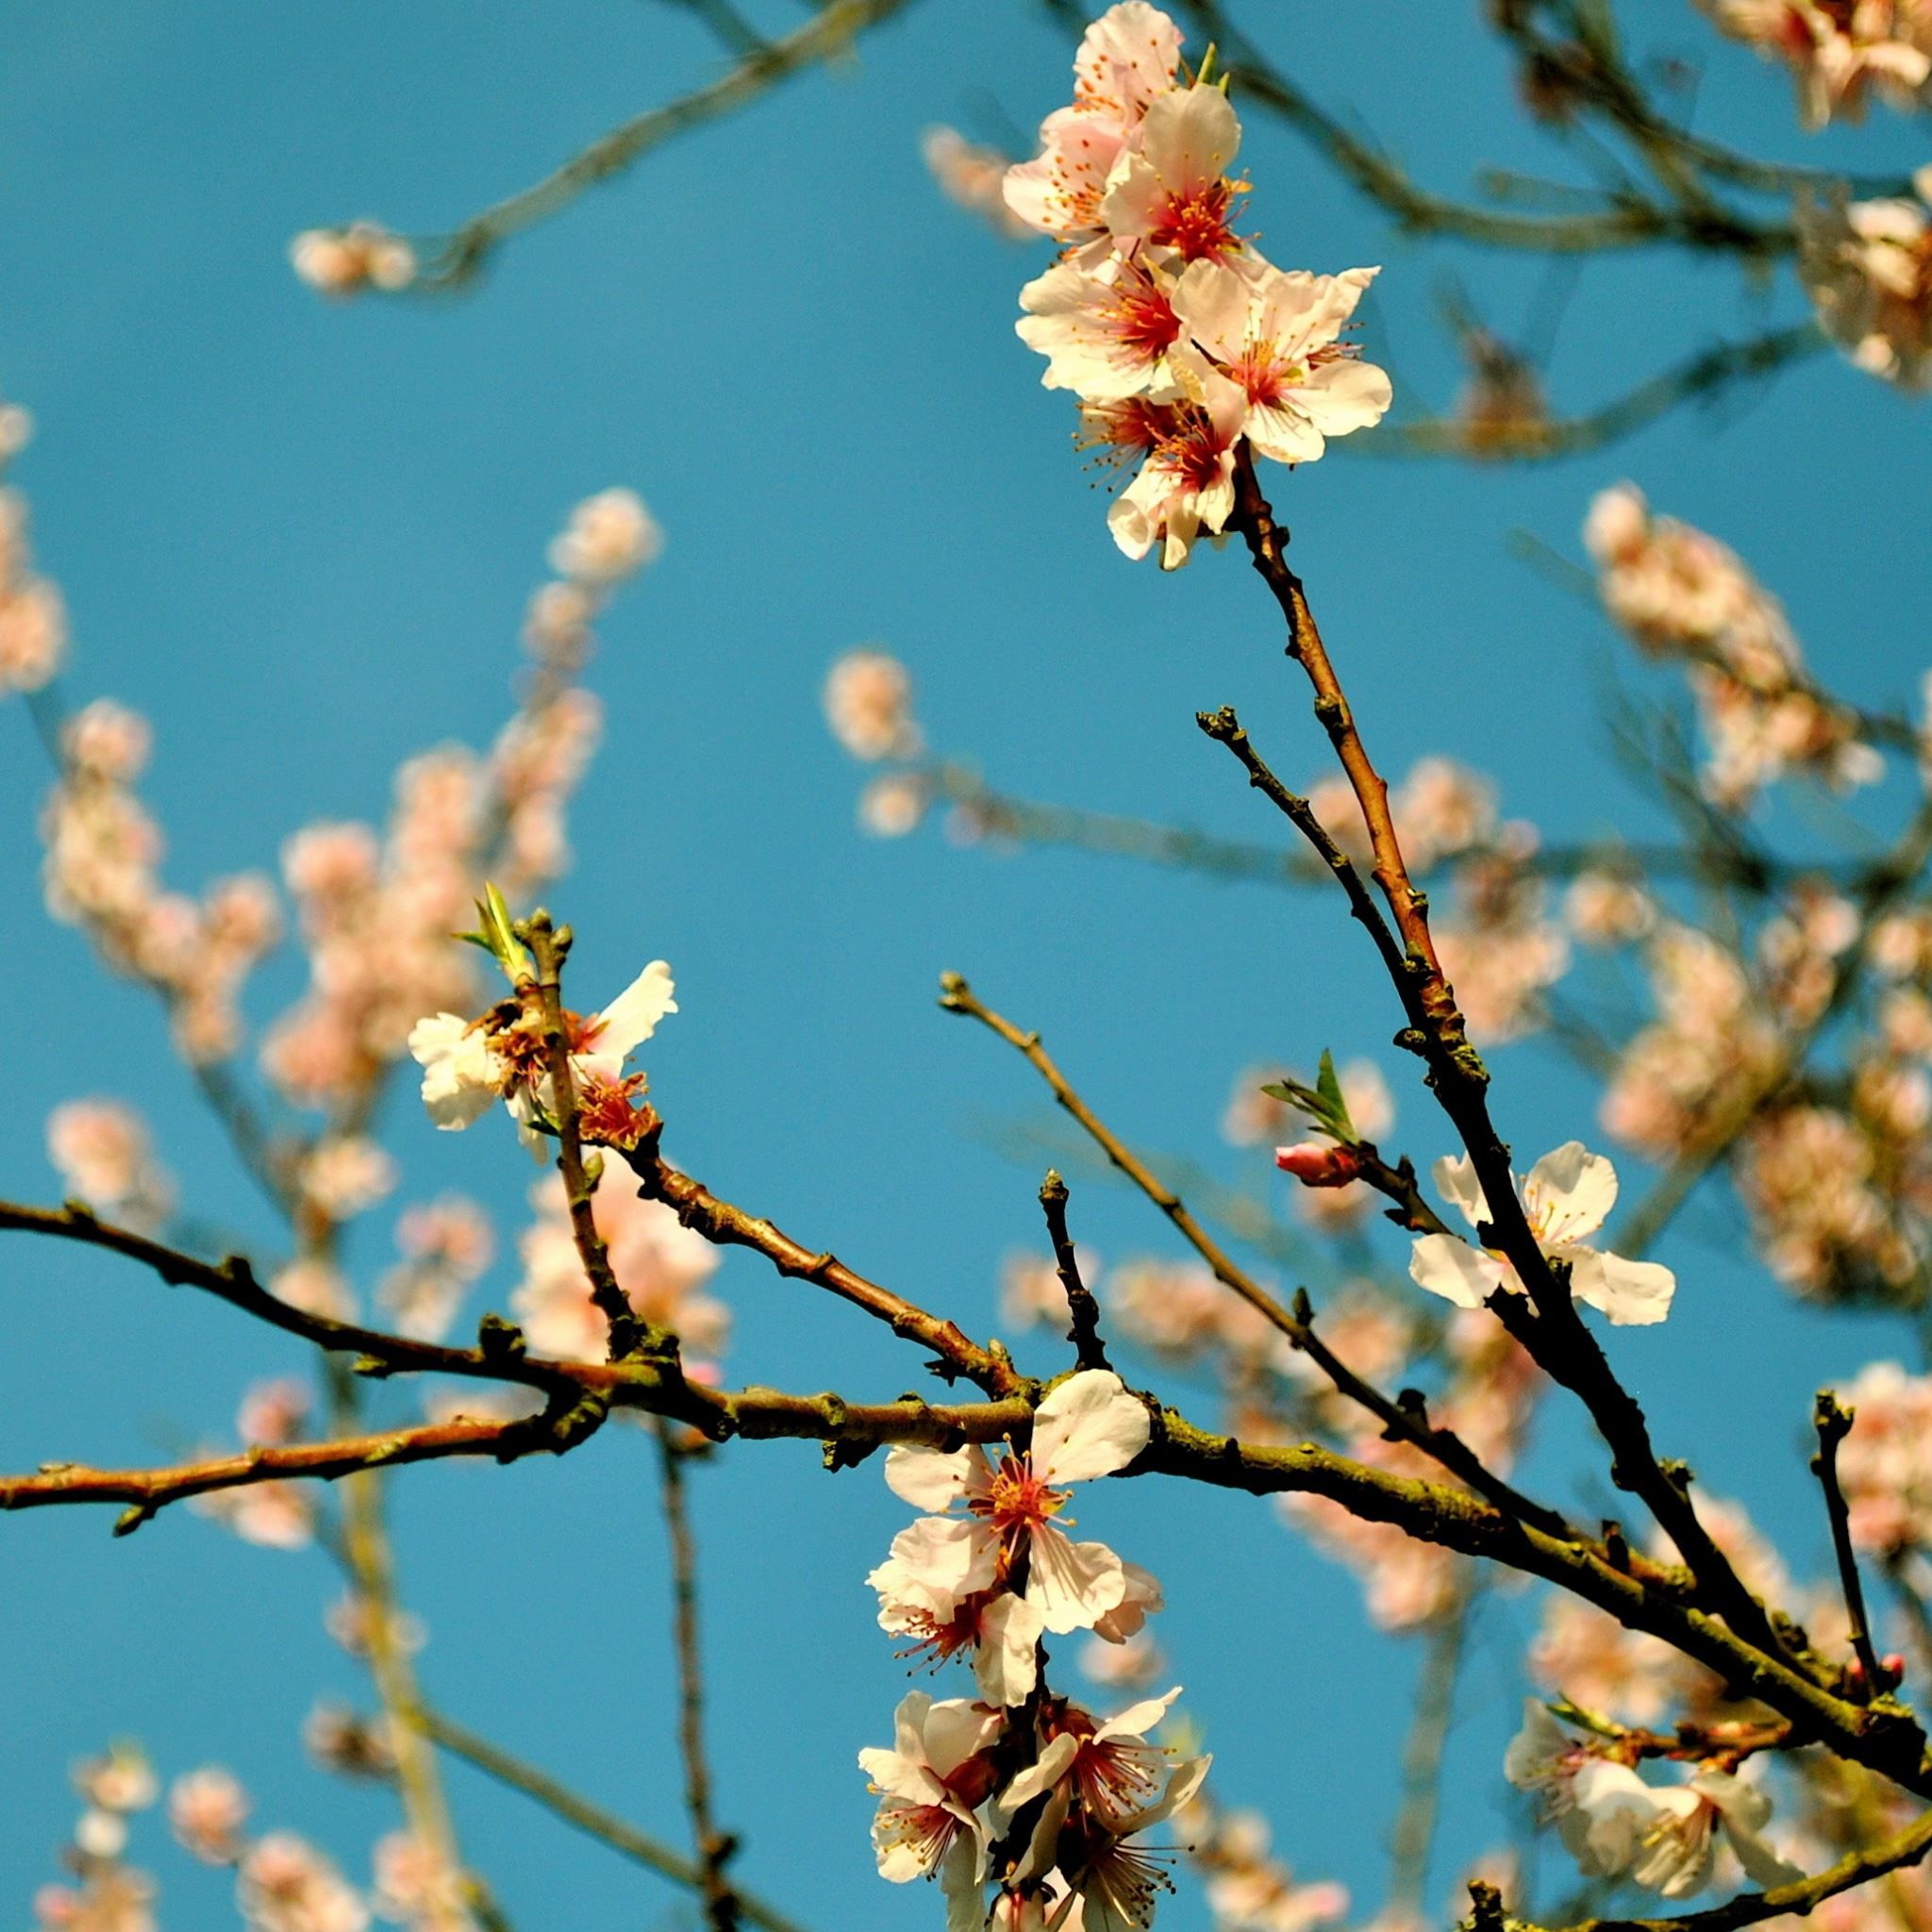 A tree with flowers on it in the sun - Spring